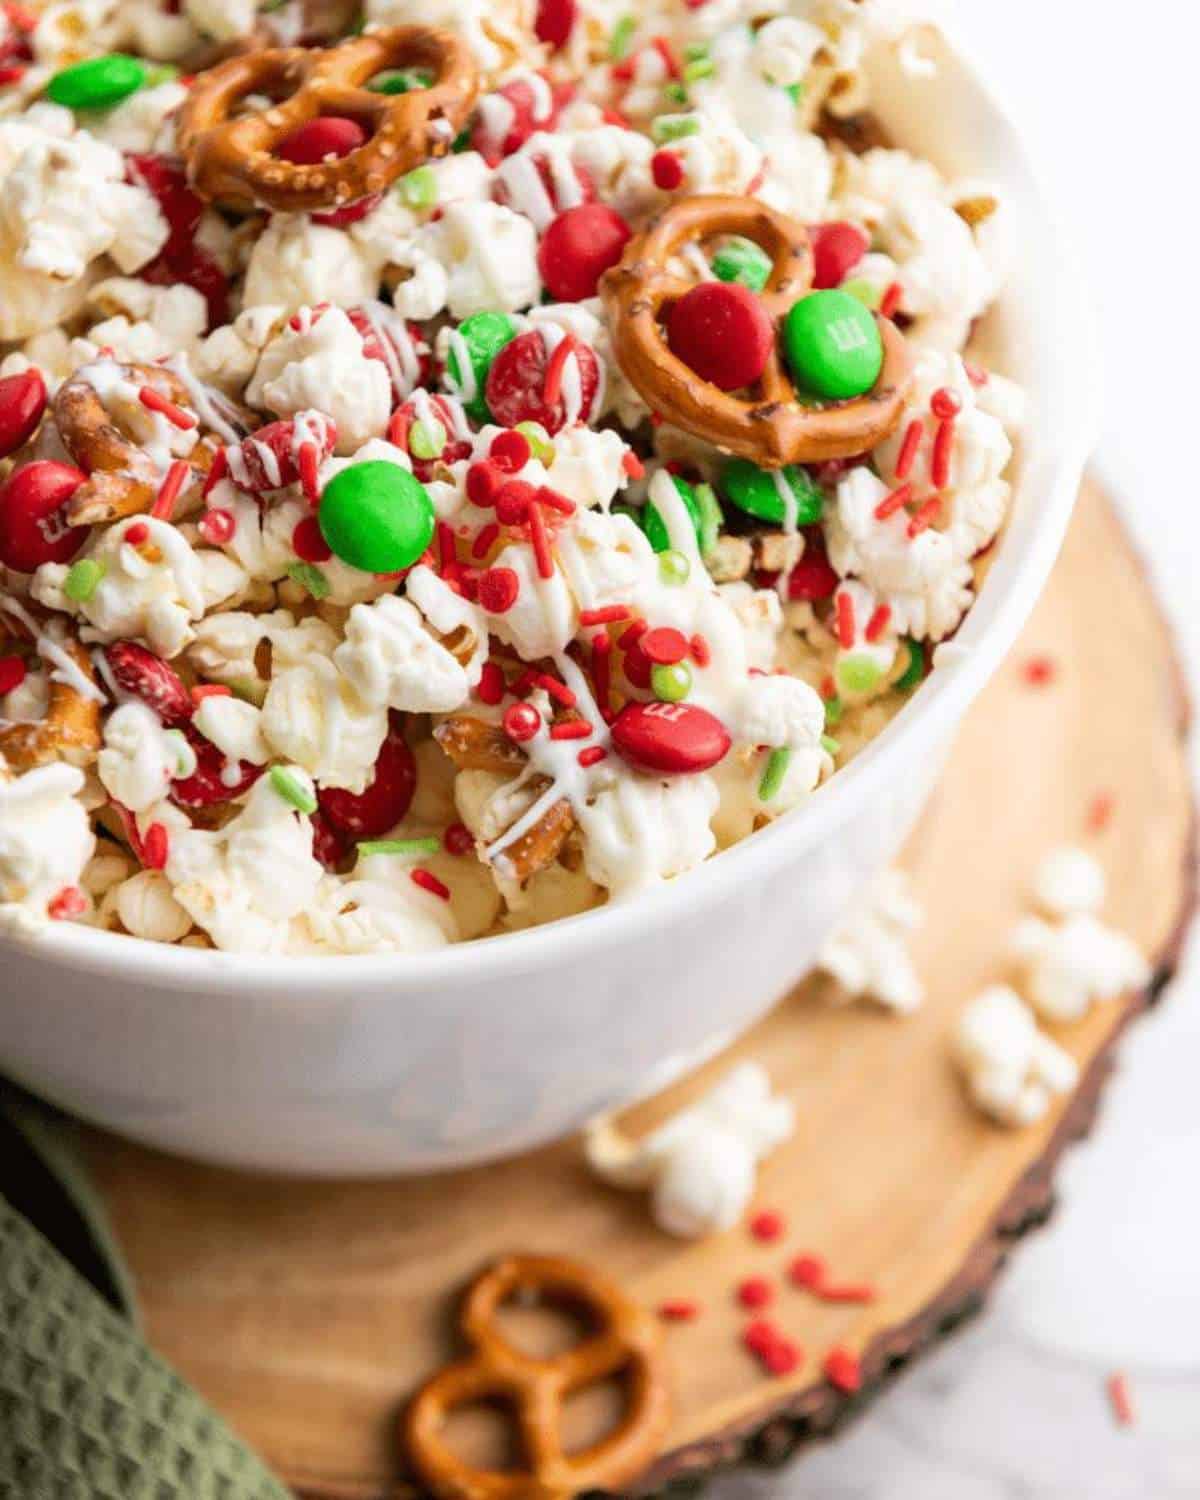 Bowl of popcorn topped with red and green sprinkles and candies.